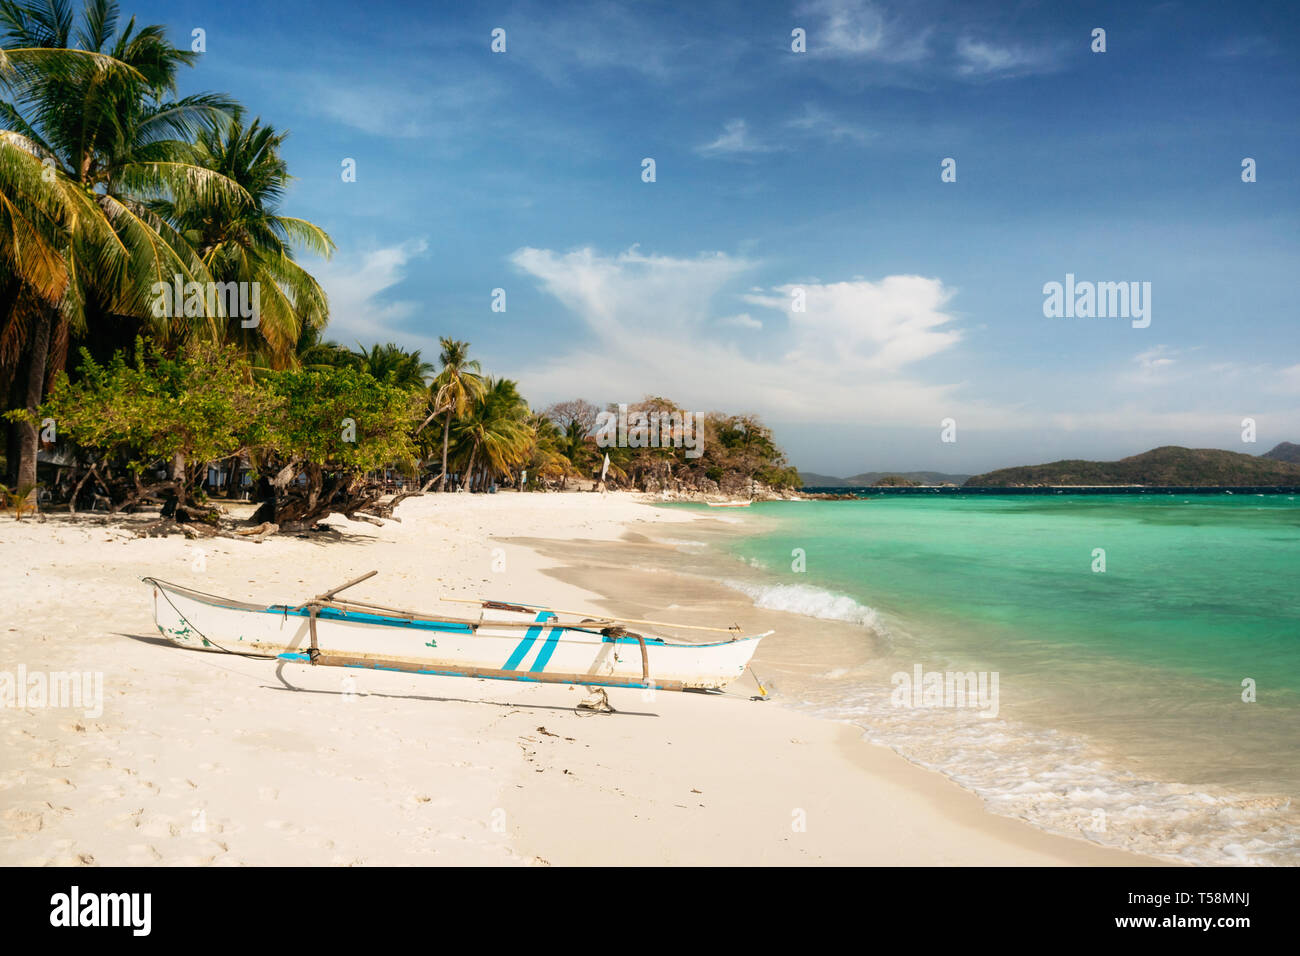 Tropical Malcapuya island with traditional philippines bangka boat, azure water and white sand beach. Travel vacation at Philippines. Stock Photo